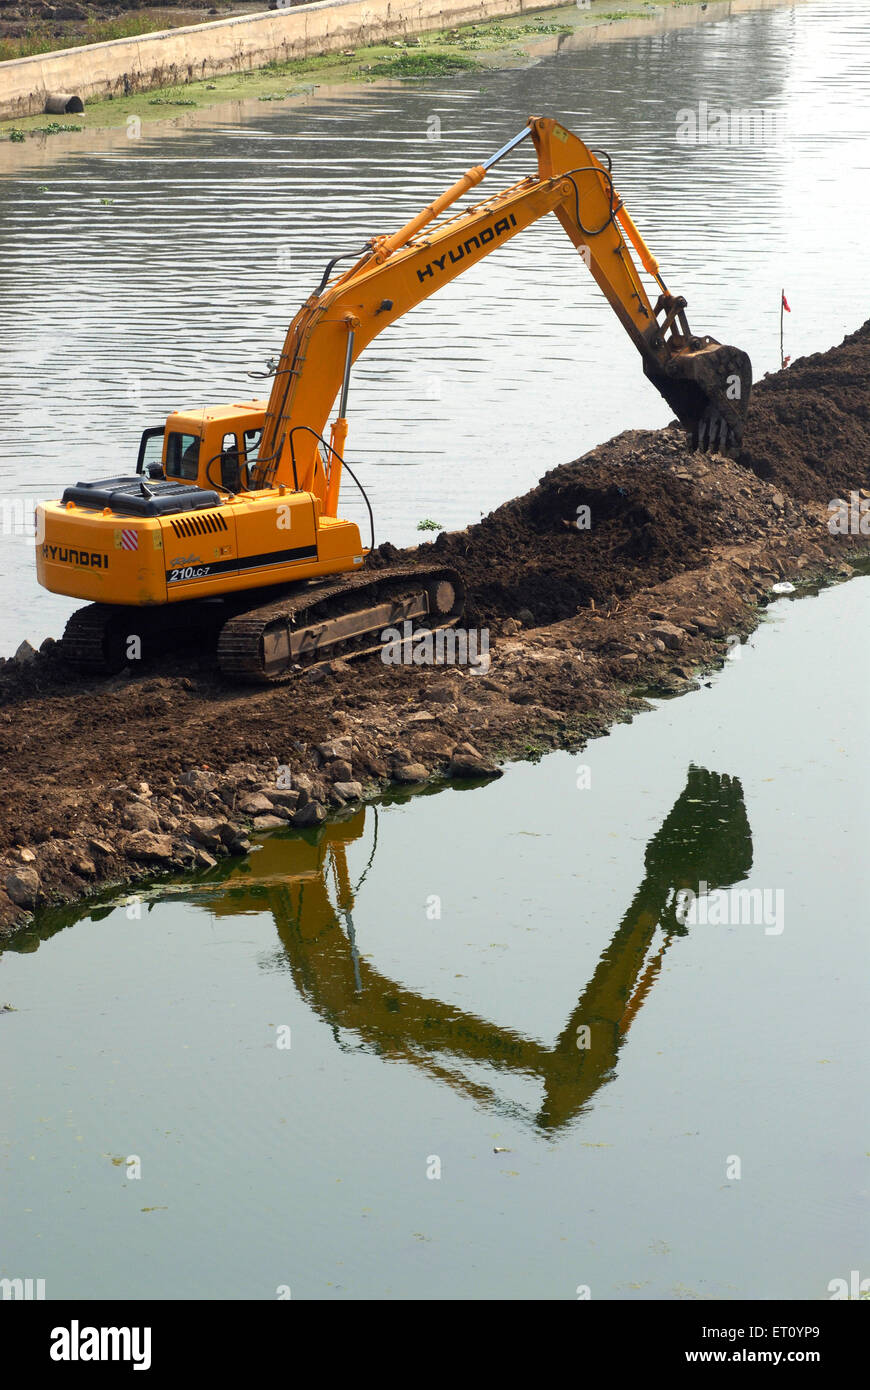 Excavator and digger Bulldozer of HYUNDAI Rolex 210 LC 7 heavy machinery ;  excavation work at bank river Mutha Pune Stock Photo